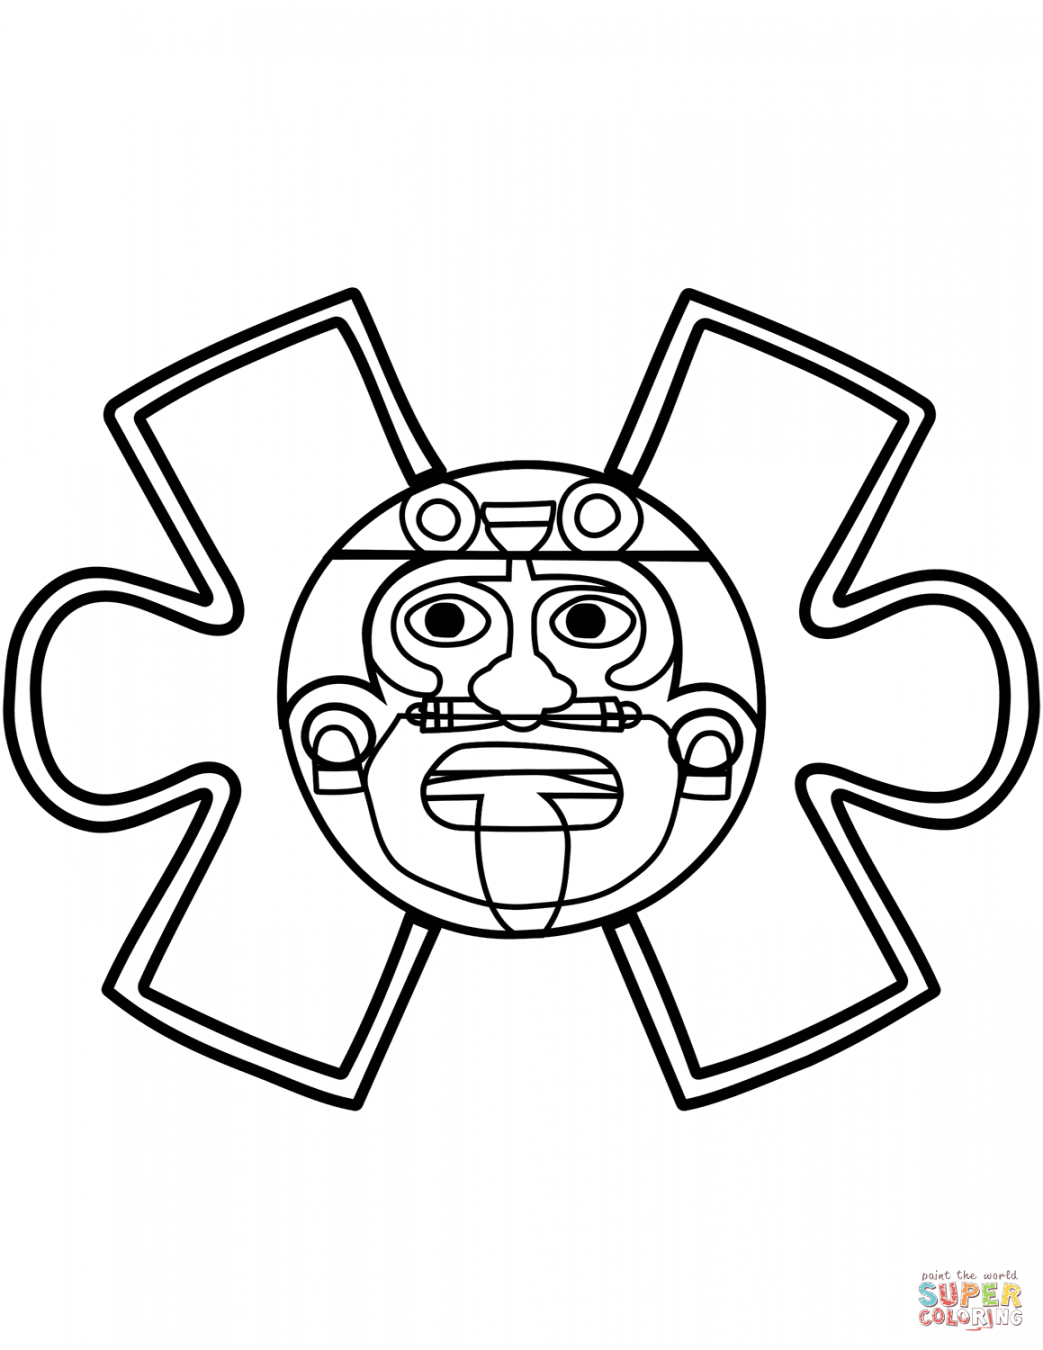 Aztec Calendar Stone coloring page  Free Printable Coloring Pages